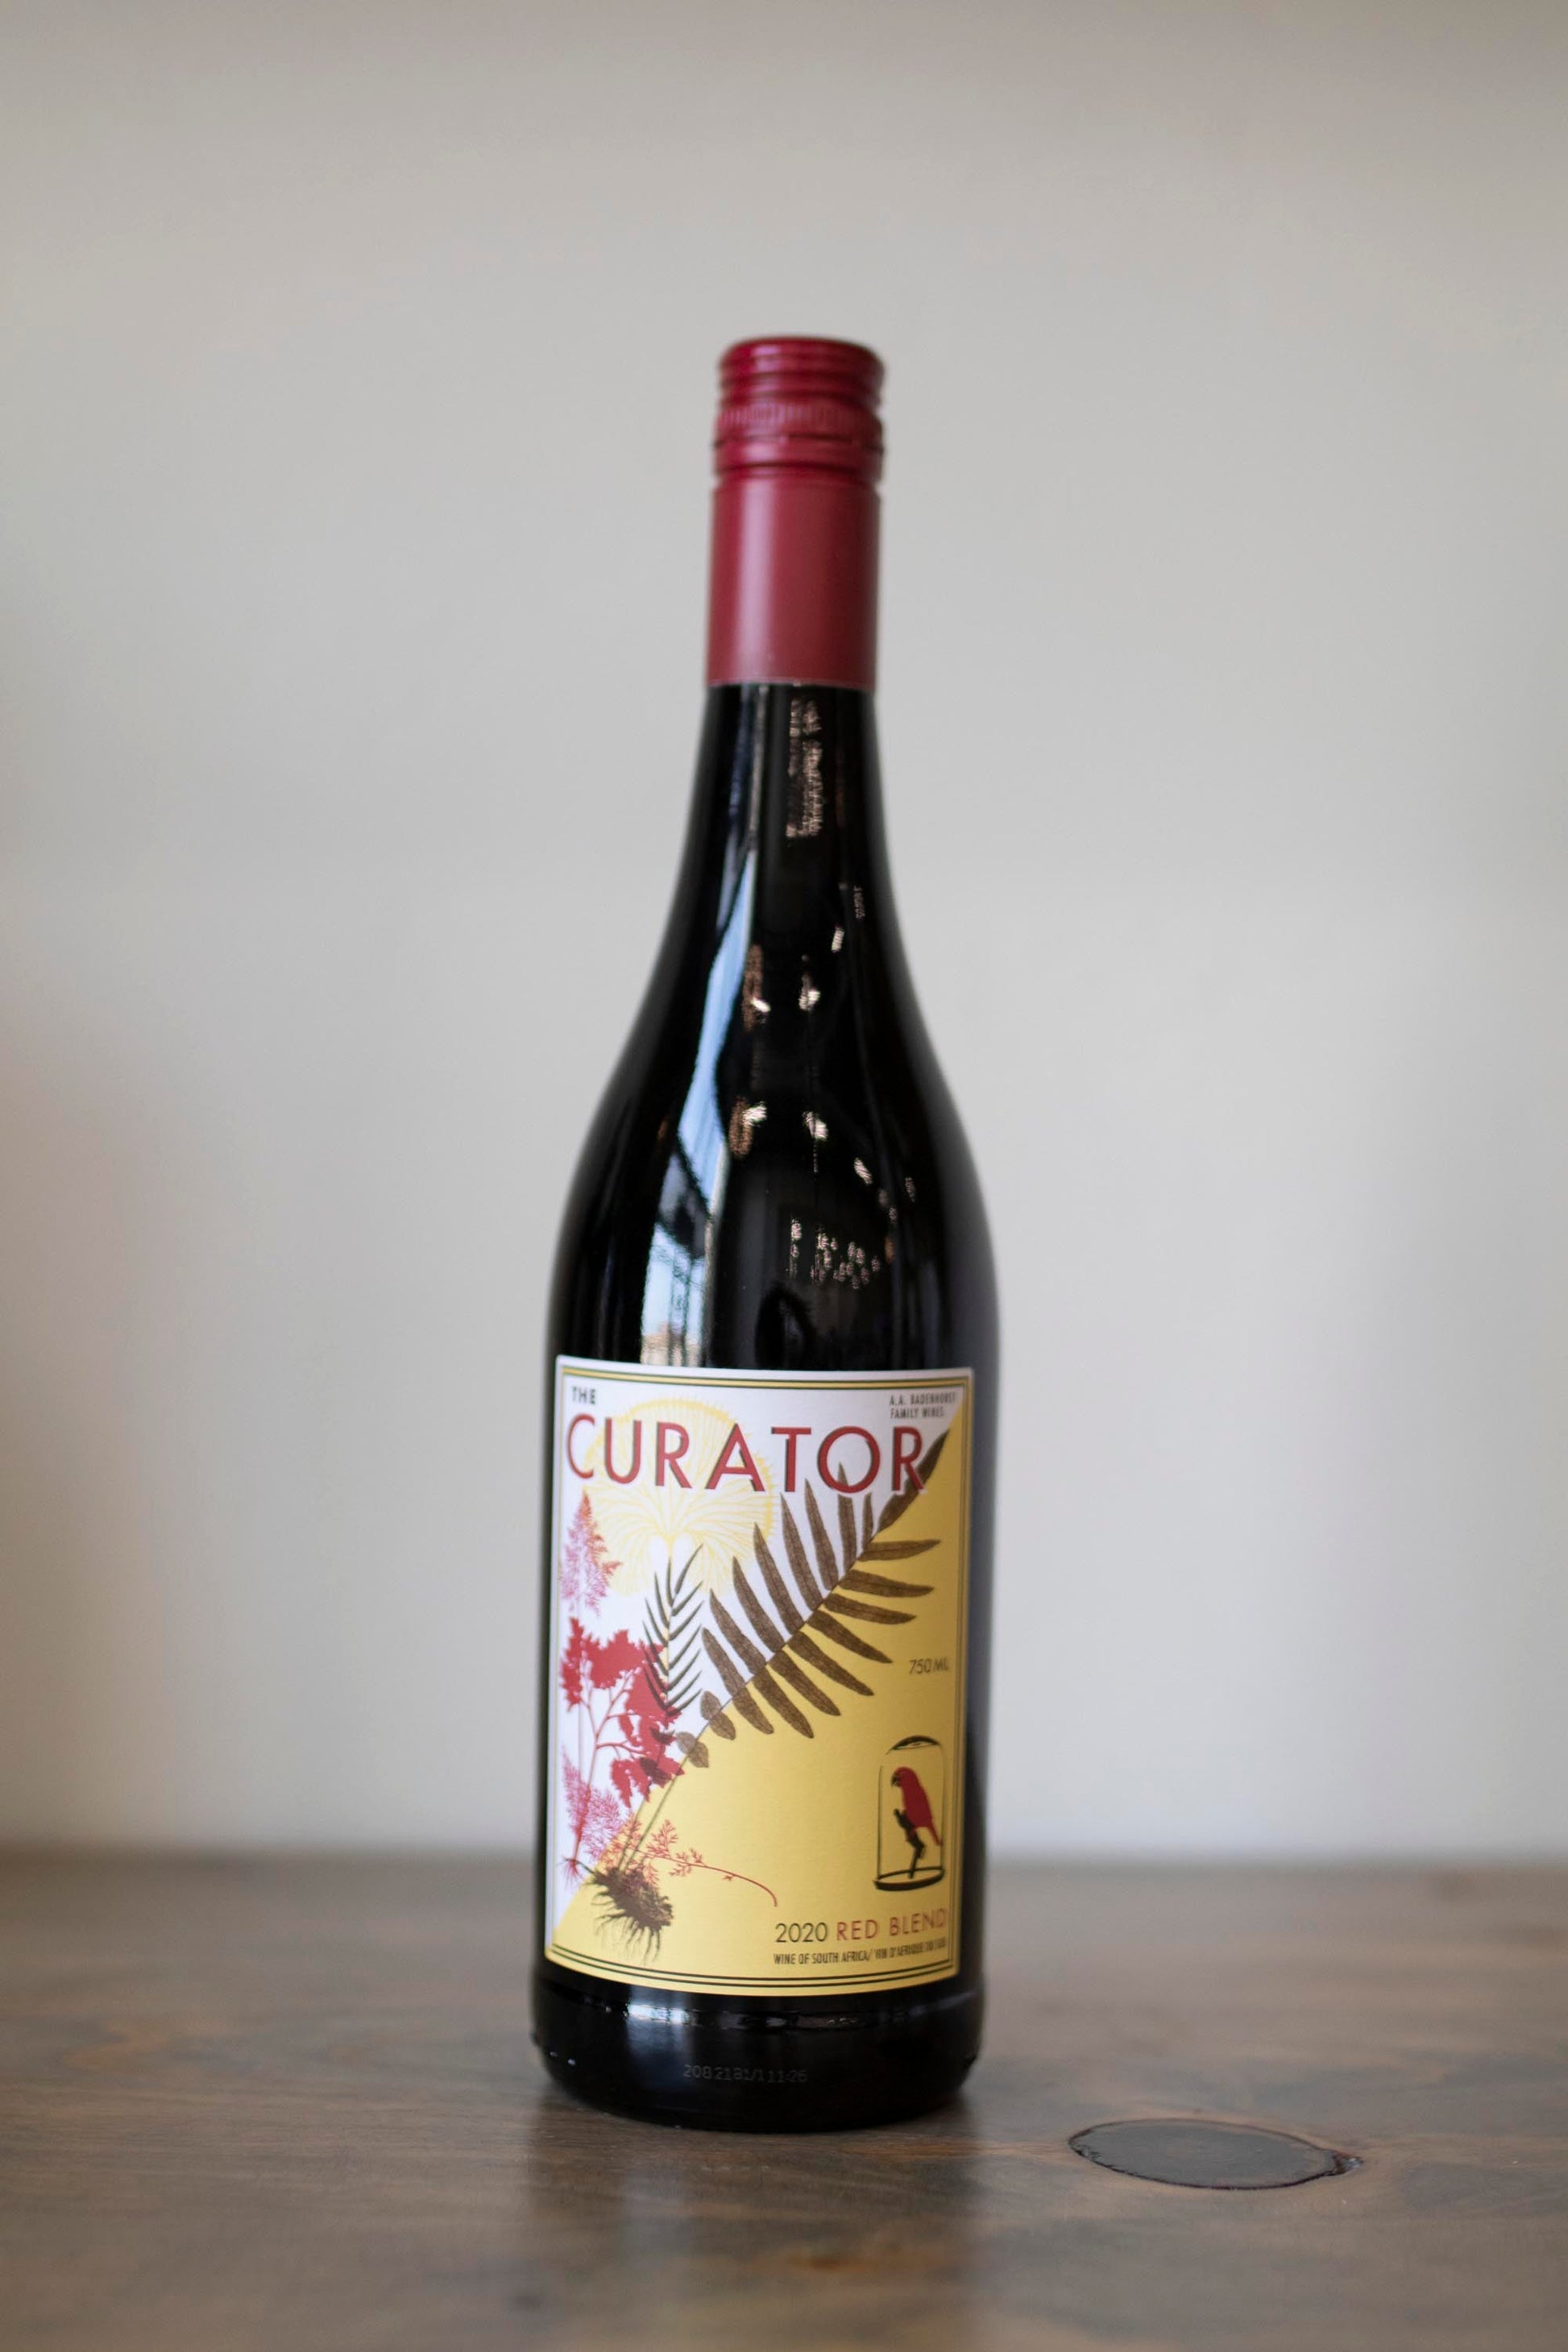 Bottle of The curator red found at Vine & Board in 3809 NW 166th St Suite 1, Edmond, OK 73012